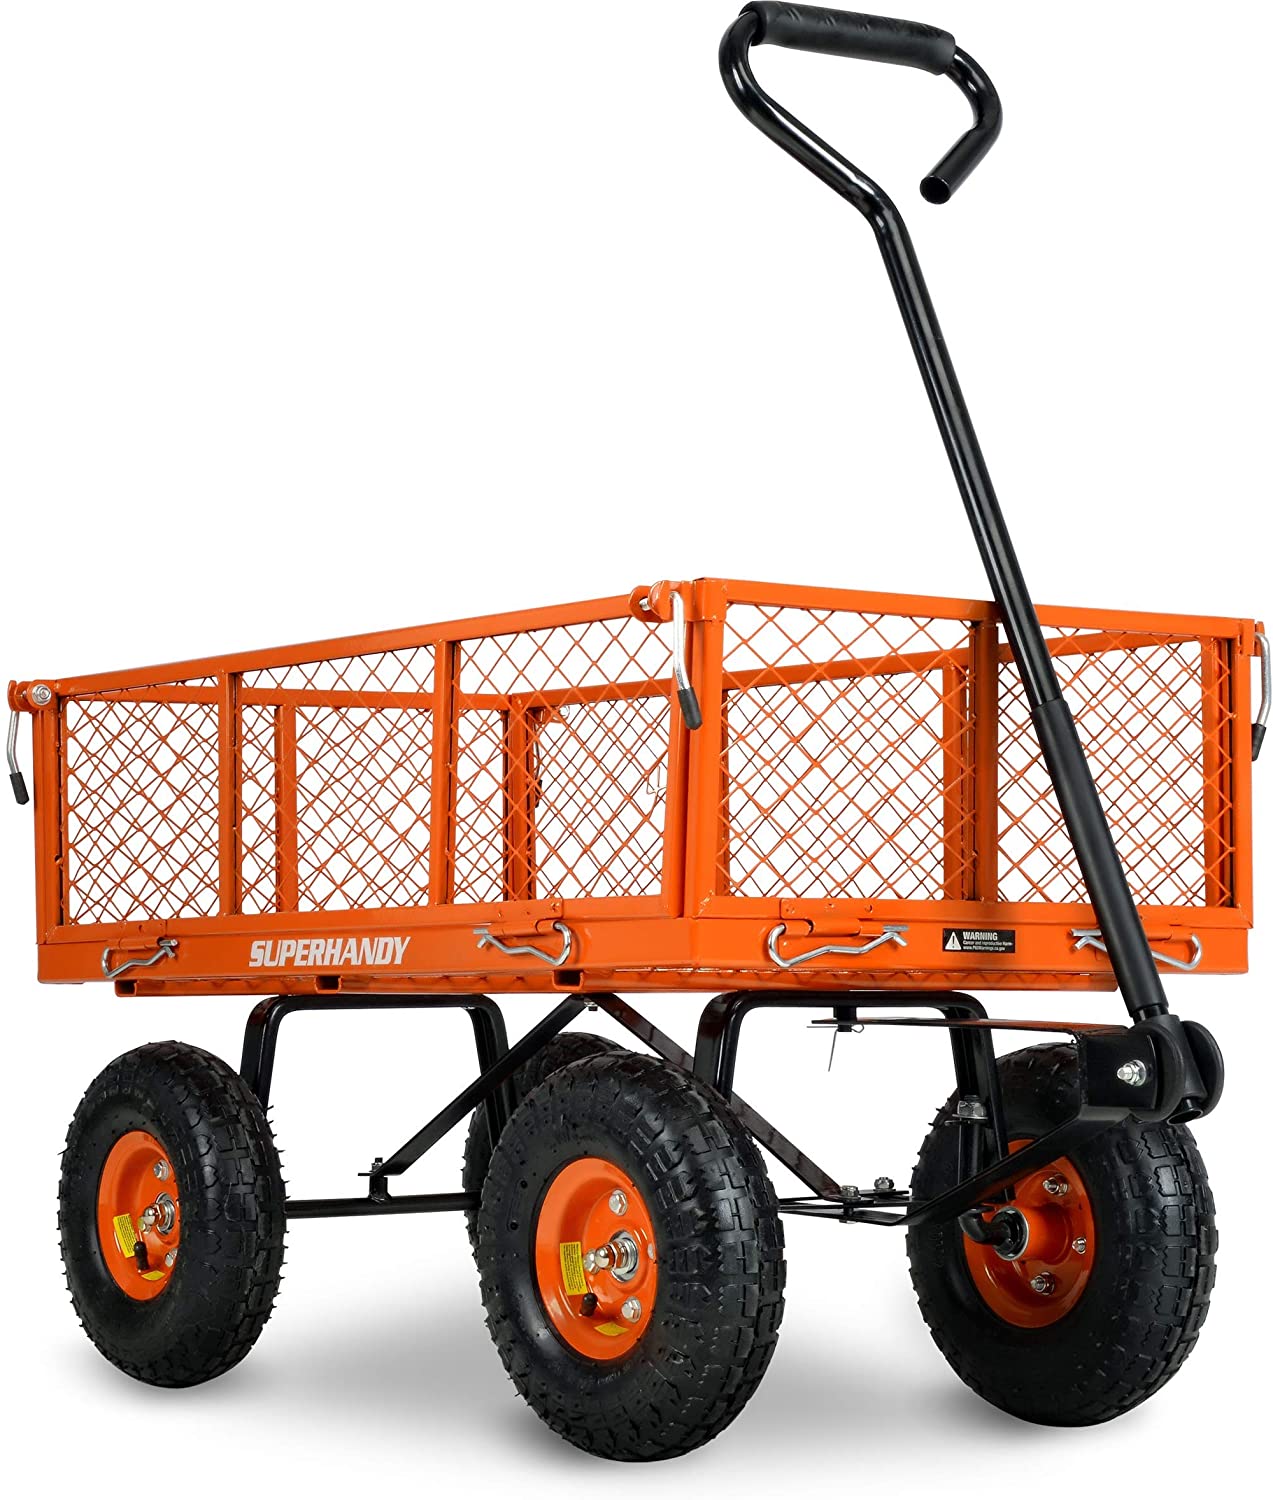 SuperHandy Wagon Utility Cart Hand Truck Manual Heavy Duty Lawn Garden with Removable Side Meshes 400 lbs Max Capacity - Great Circle UK